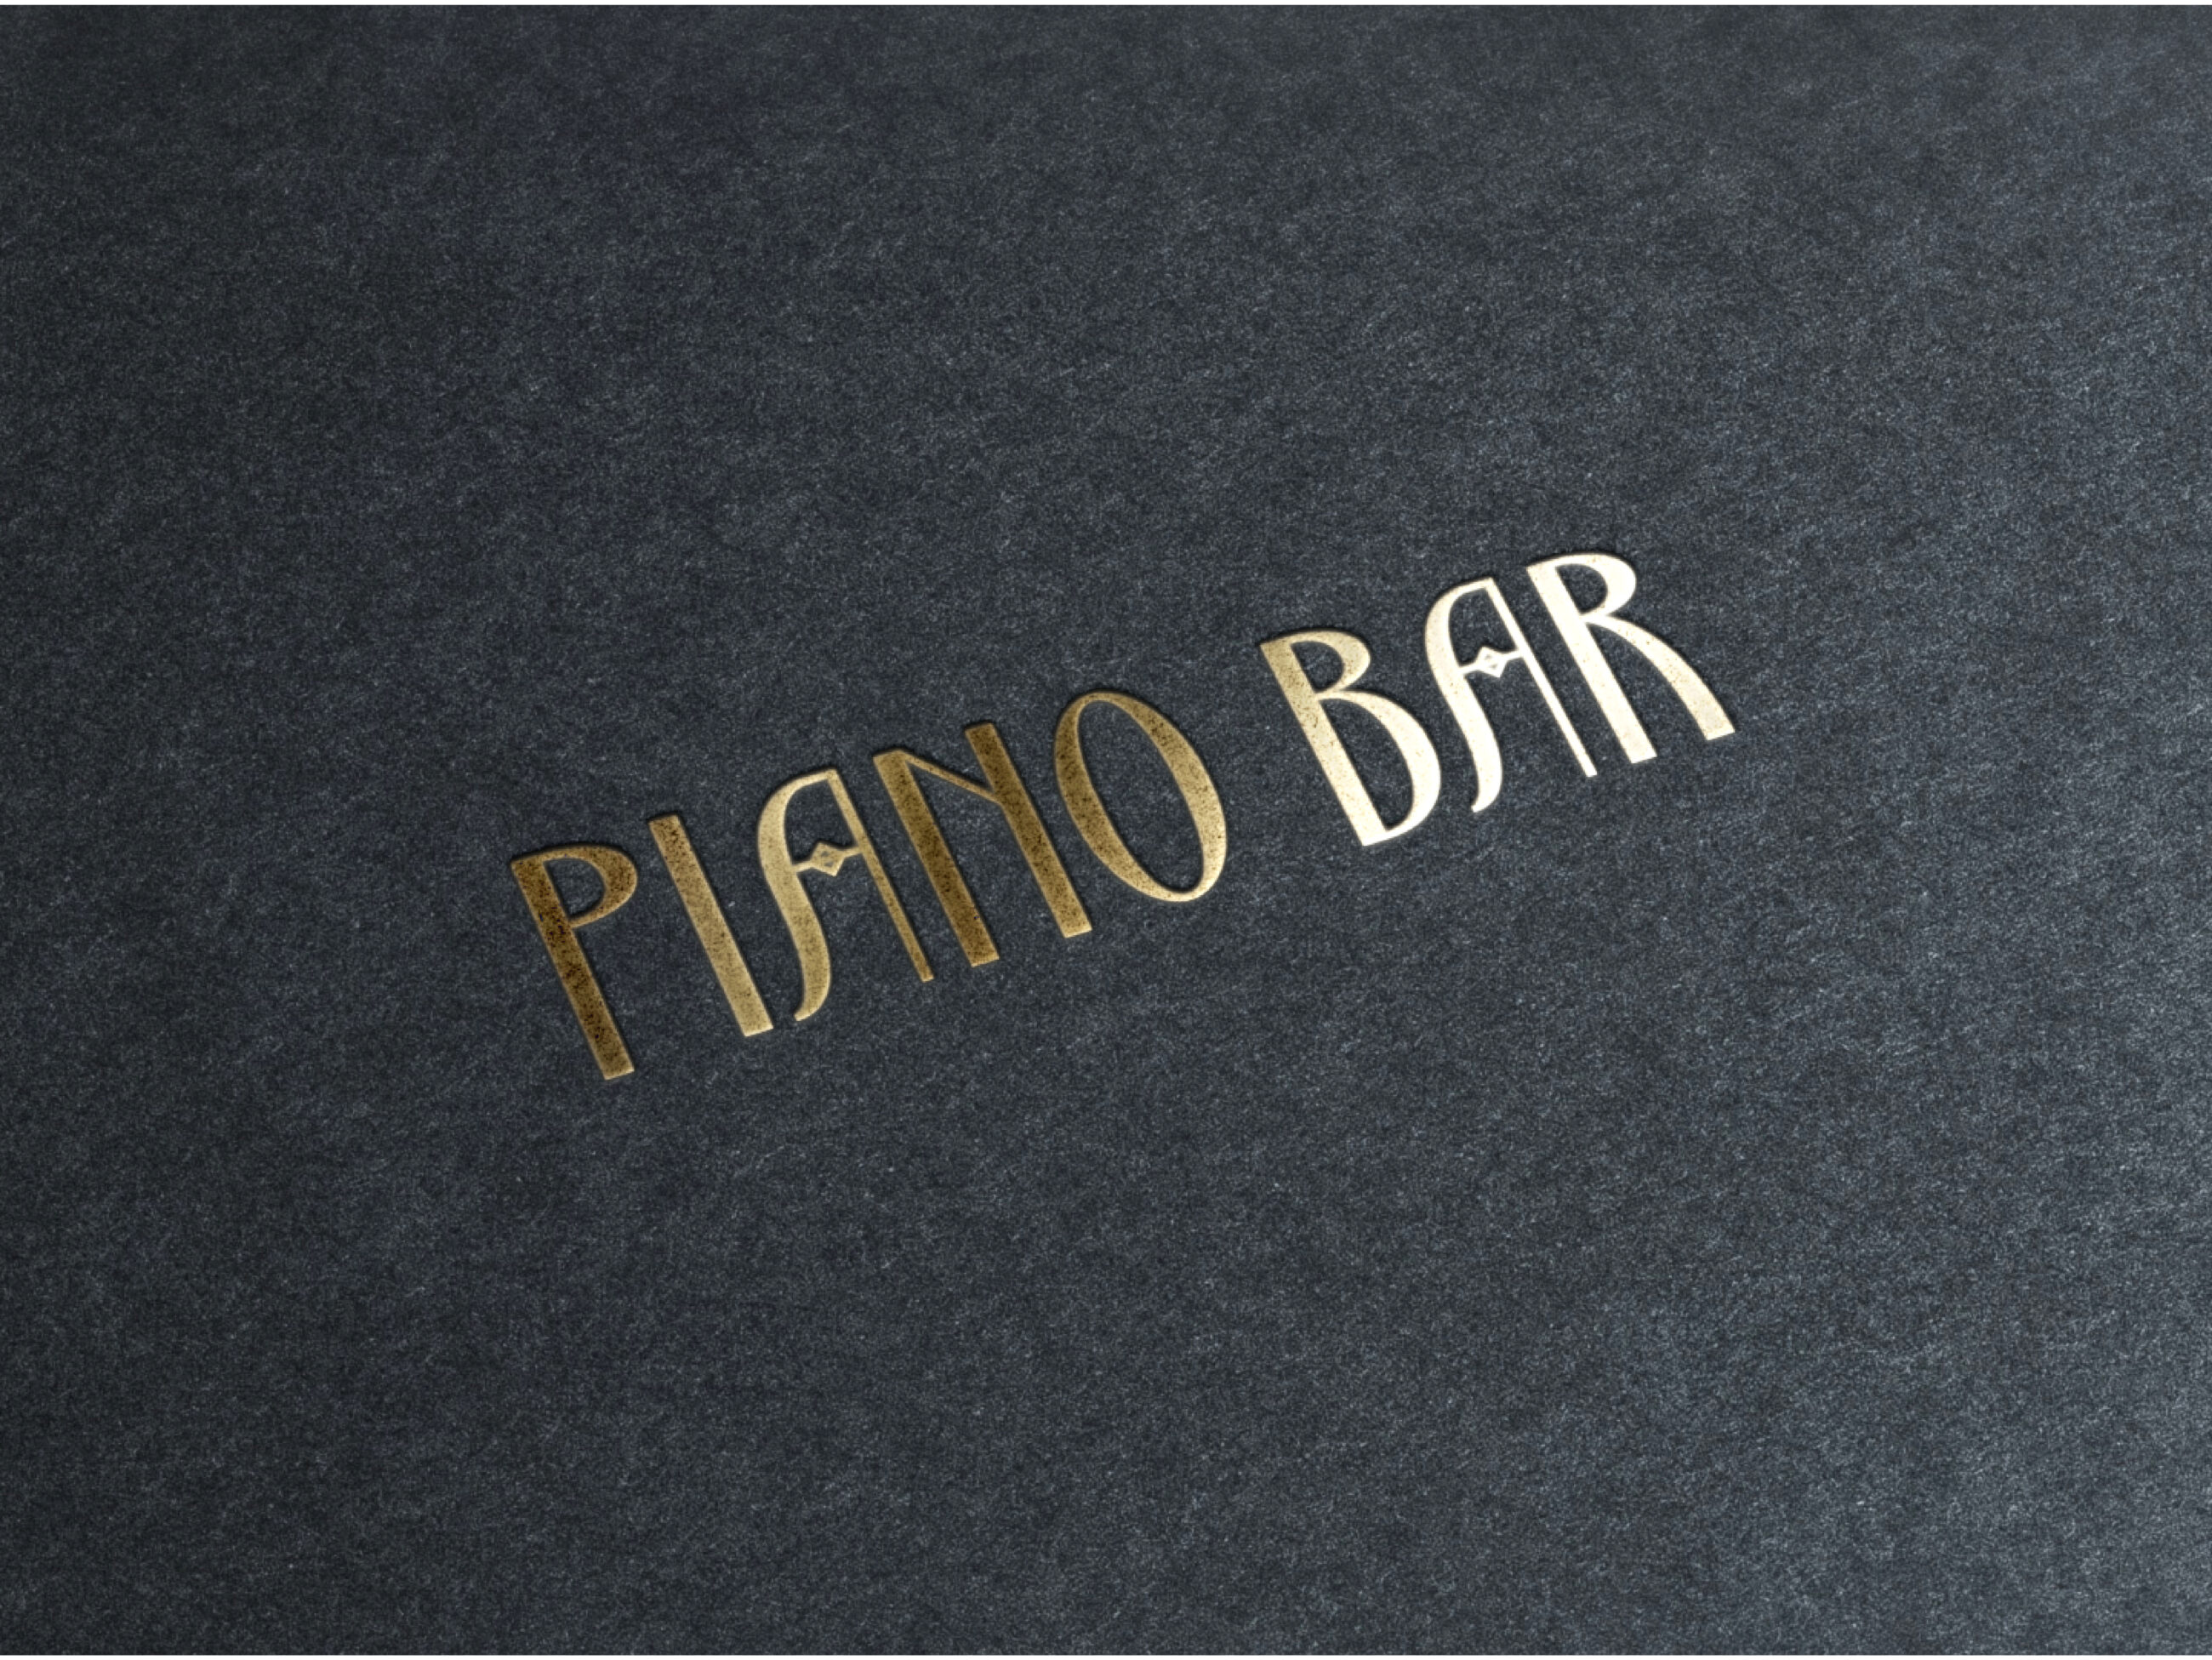 Brand expansion for Piano Bar in gold letters on suede background